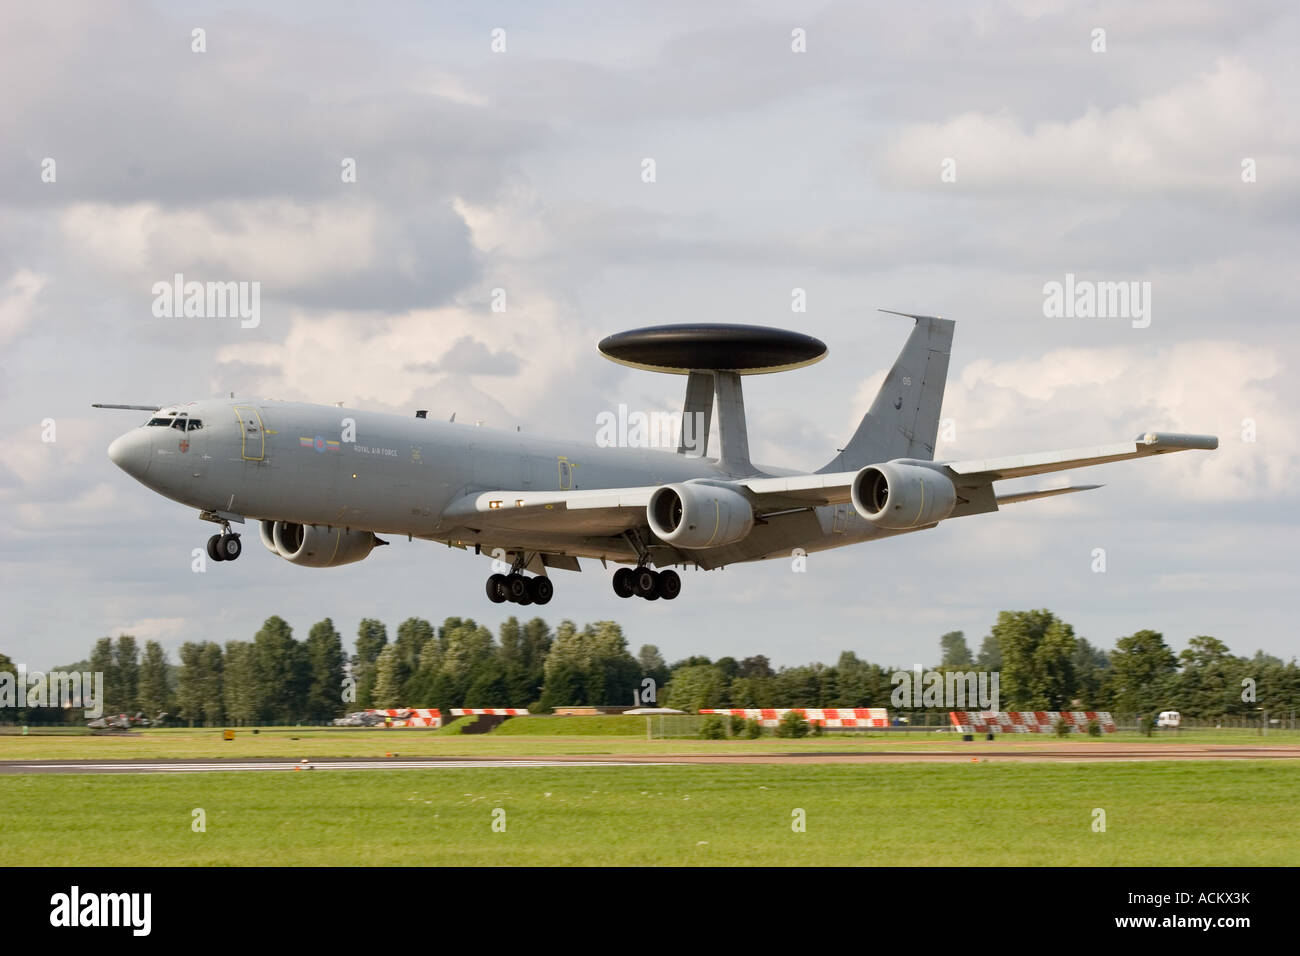 Zh105 Royal Air Force Boeing E 3d Sentry Aew1 Airborne Warning And Control System Awacs Aircraft At Raf Fairford Stock Photo Alamy